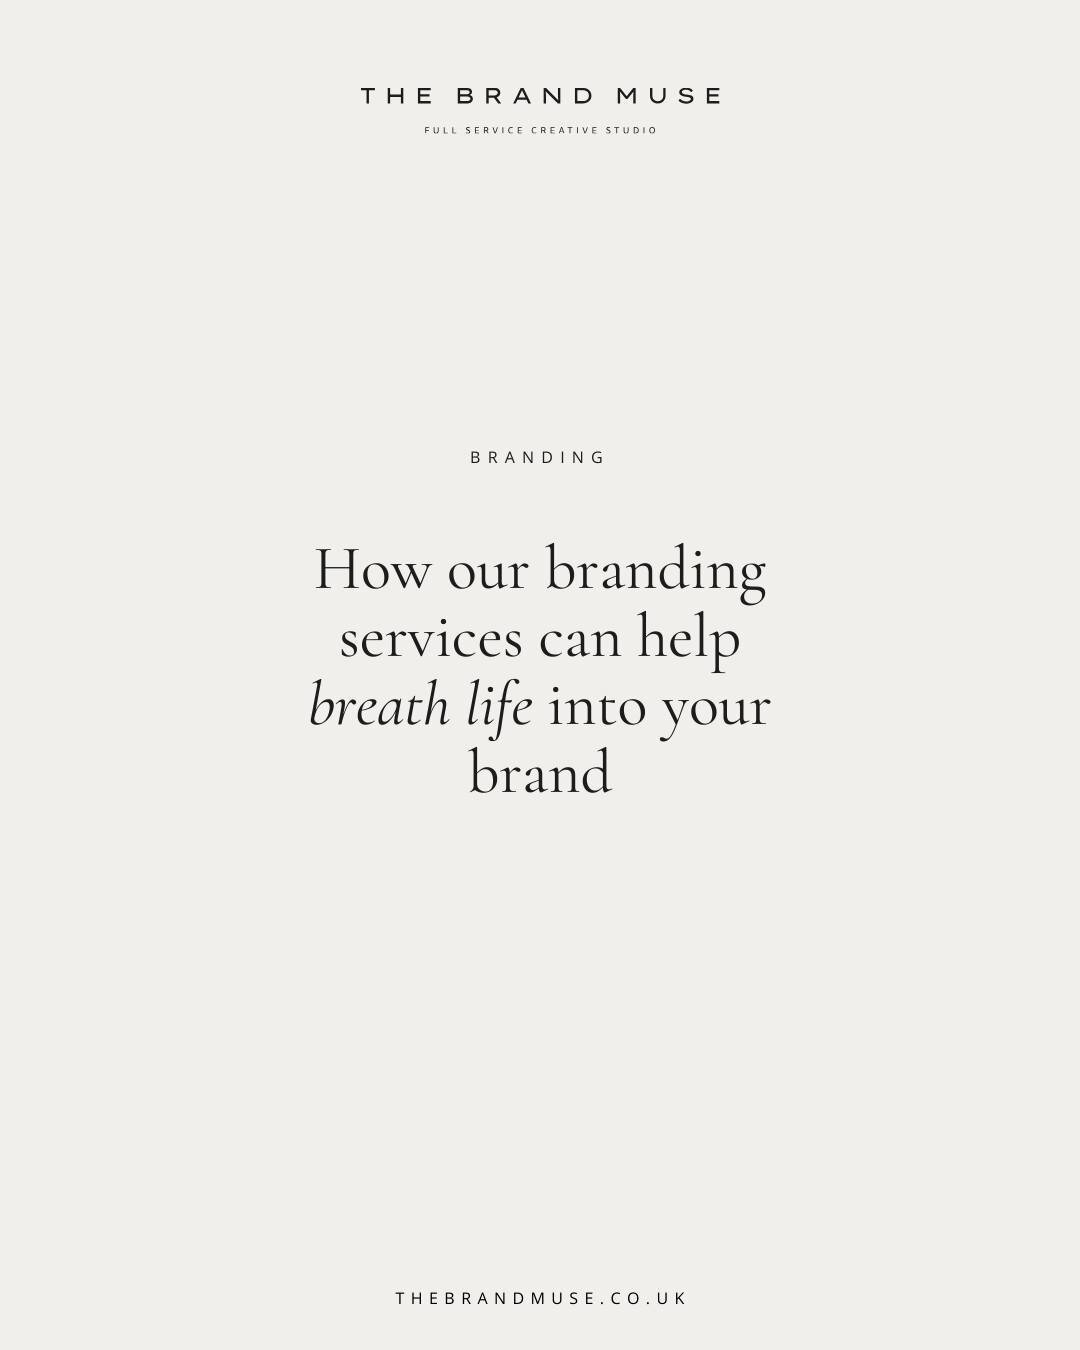 As February unfolds, we turn our focus to the heart of every business; branding...⁠
⁠
Introducing our tailored Branding Packages: Brand Strategy, Brand Identity, and Brand Refinement. ⁠
⁠
Each crafted to meet you where you are in your branding journe